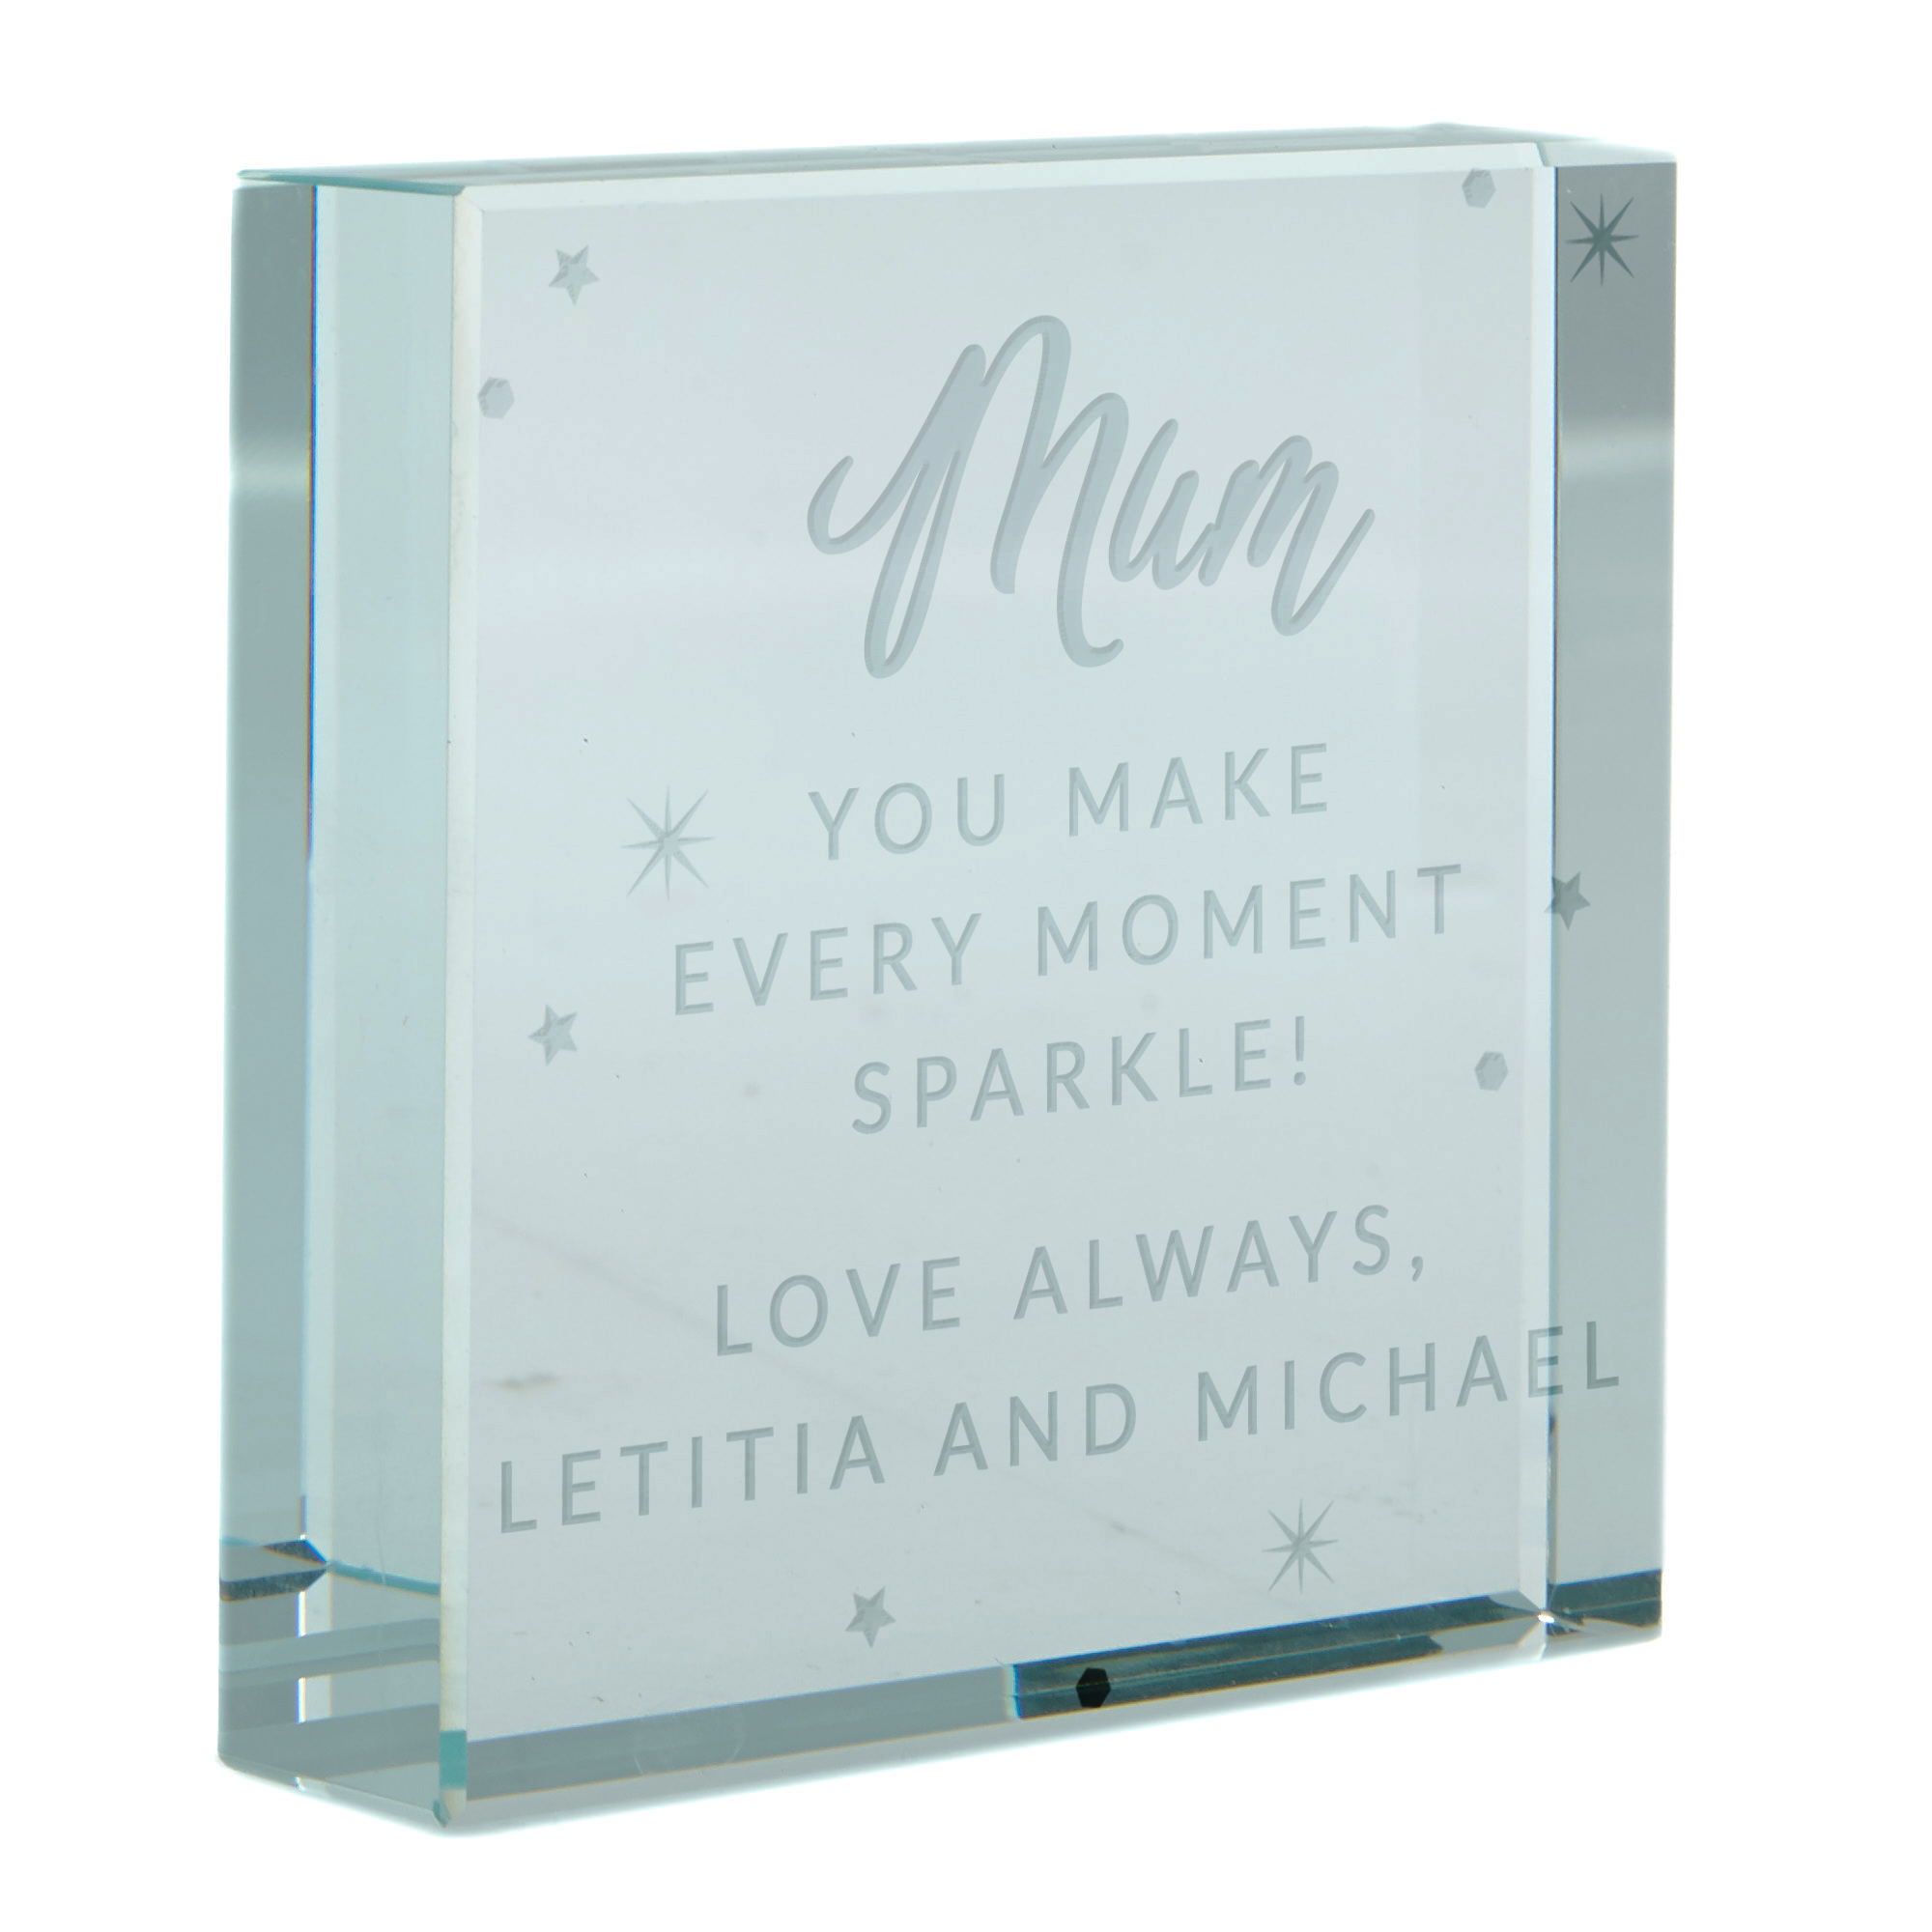 Personalised Glass Token - You Make Every Moment Sparkle